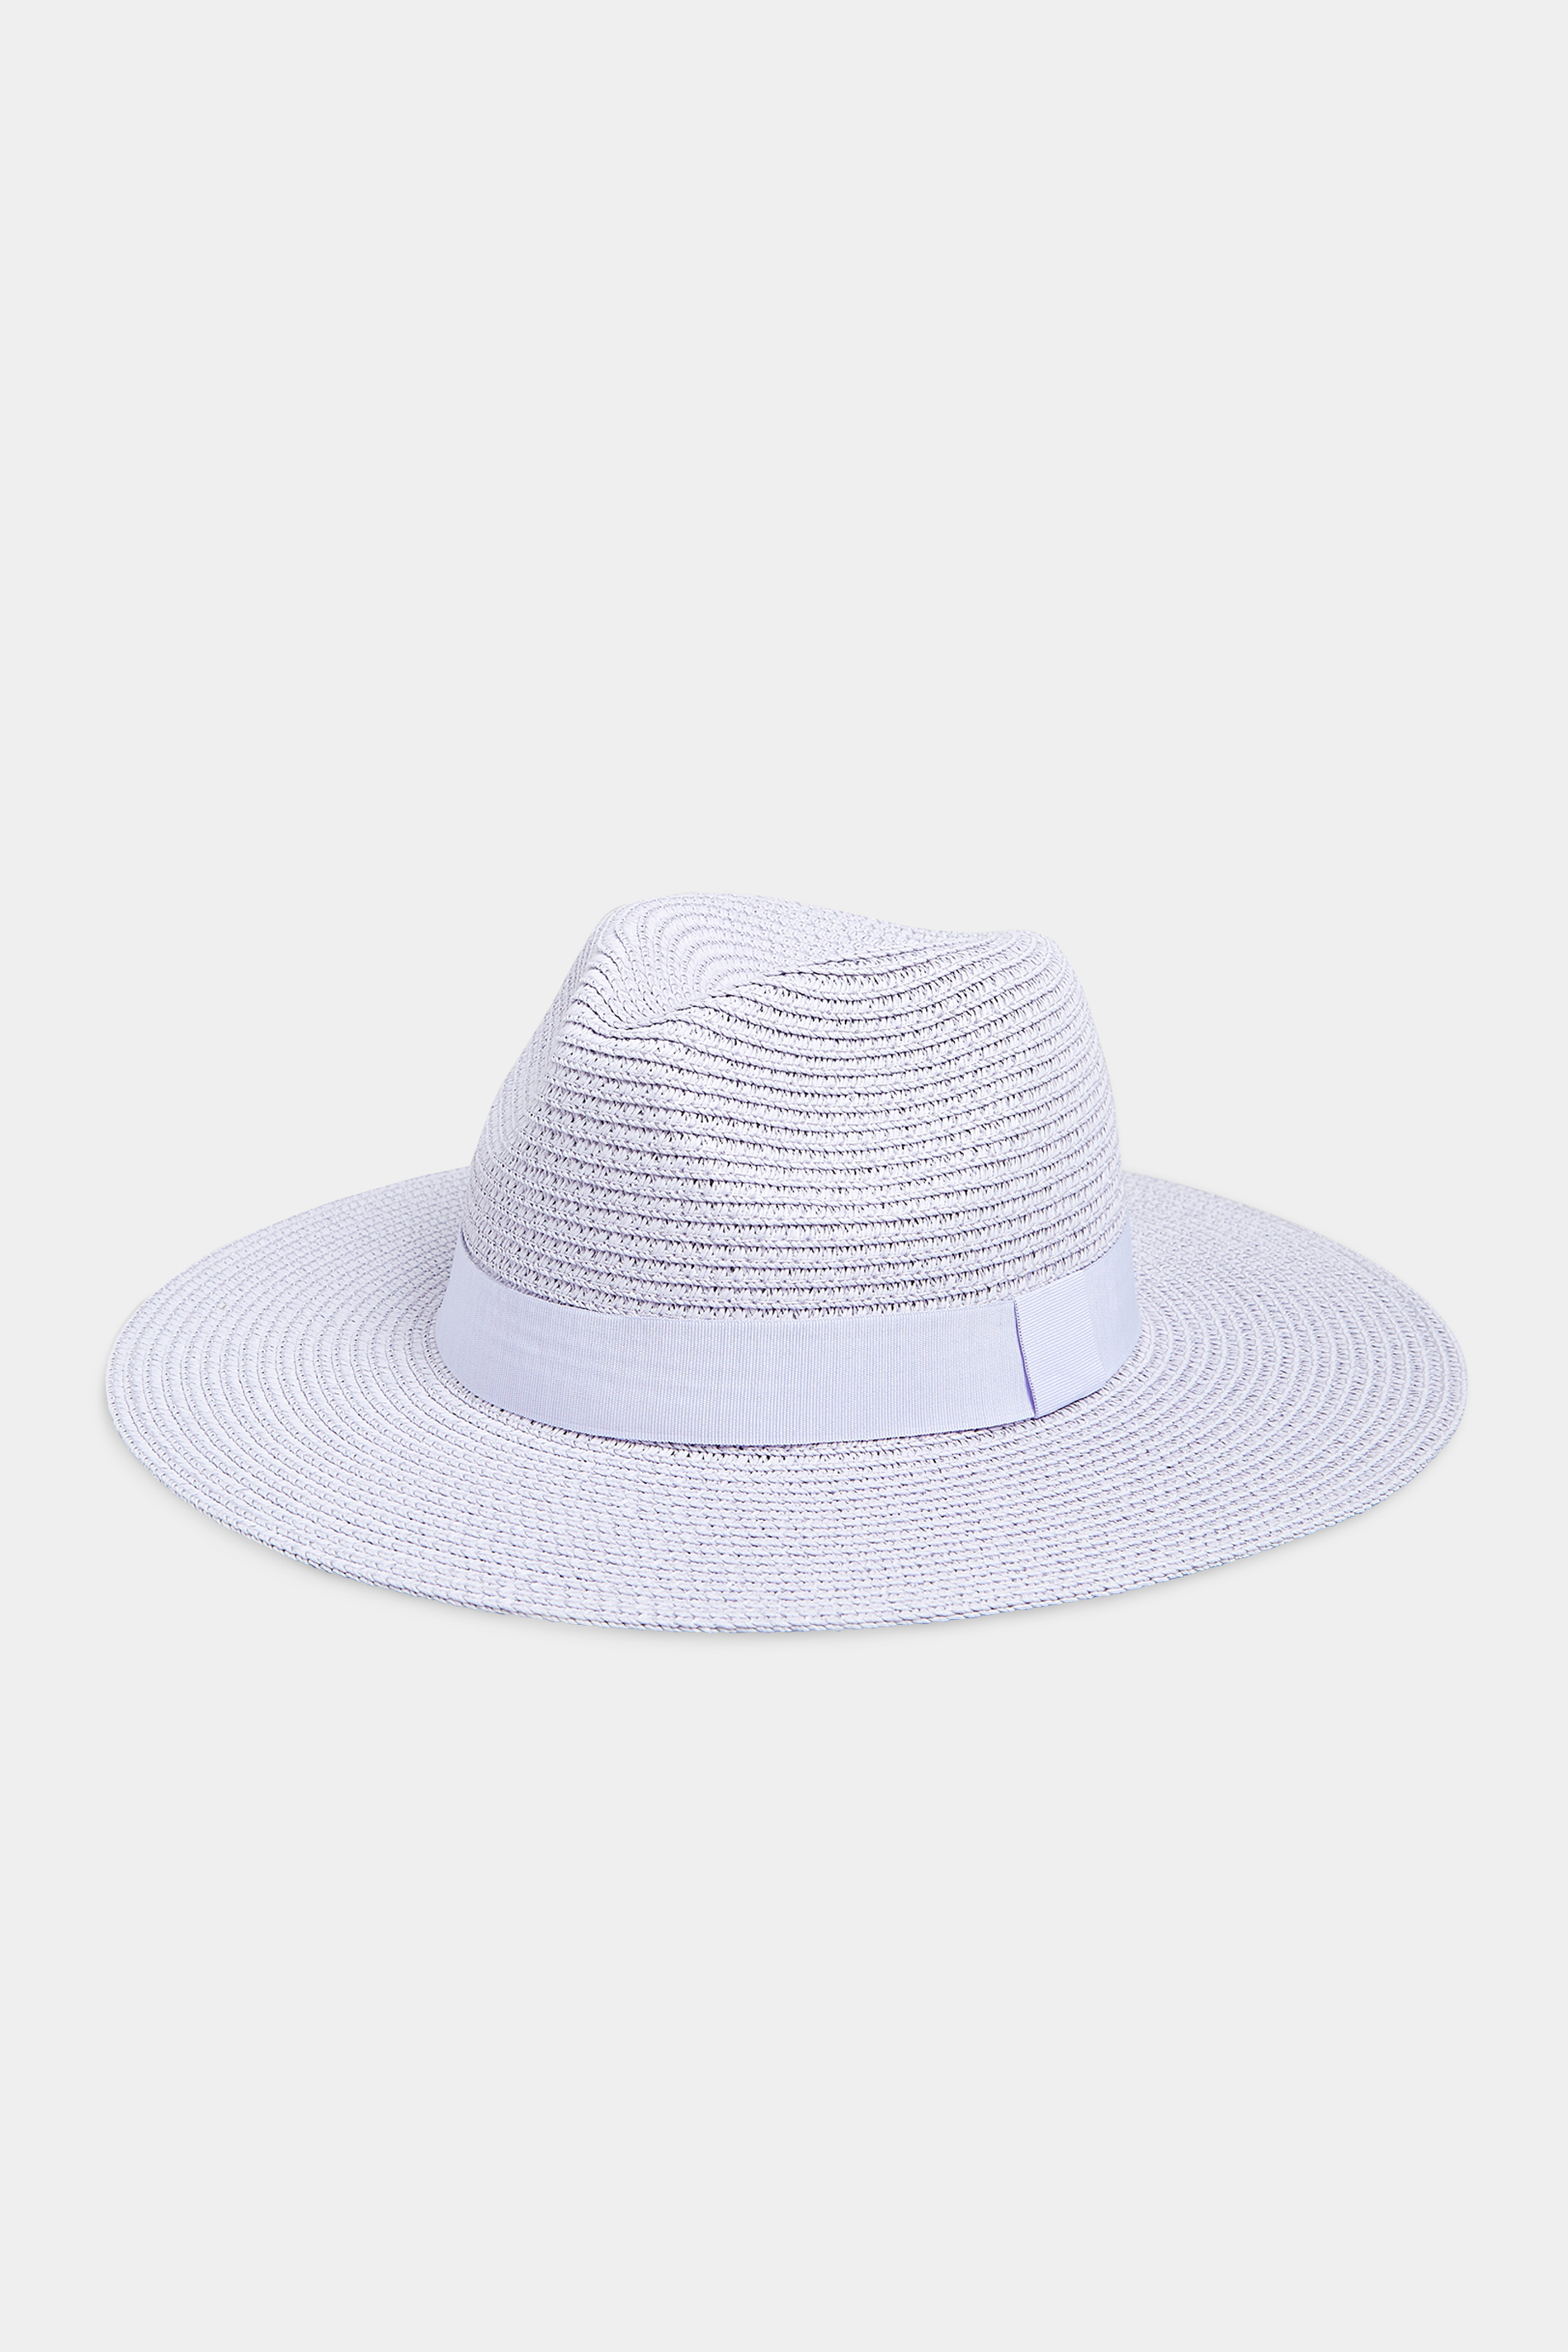 Hot Pink Straw Fedora Hat | Yours Clothing  3